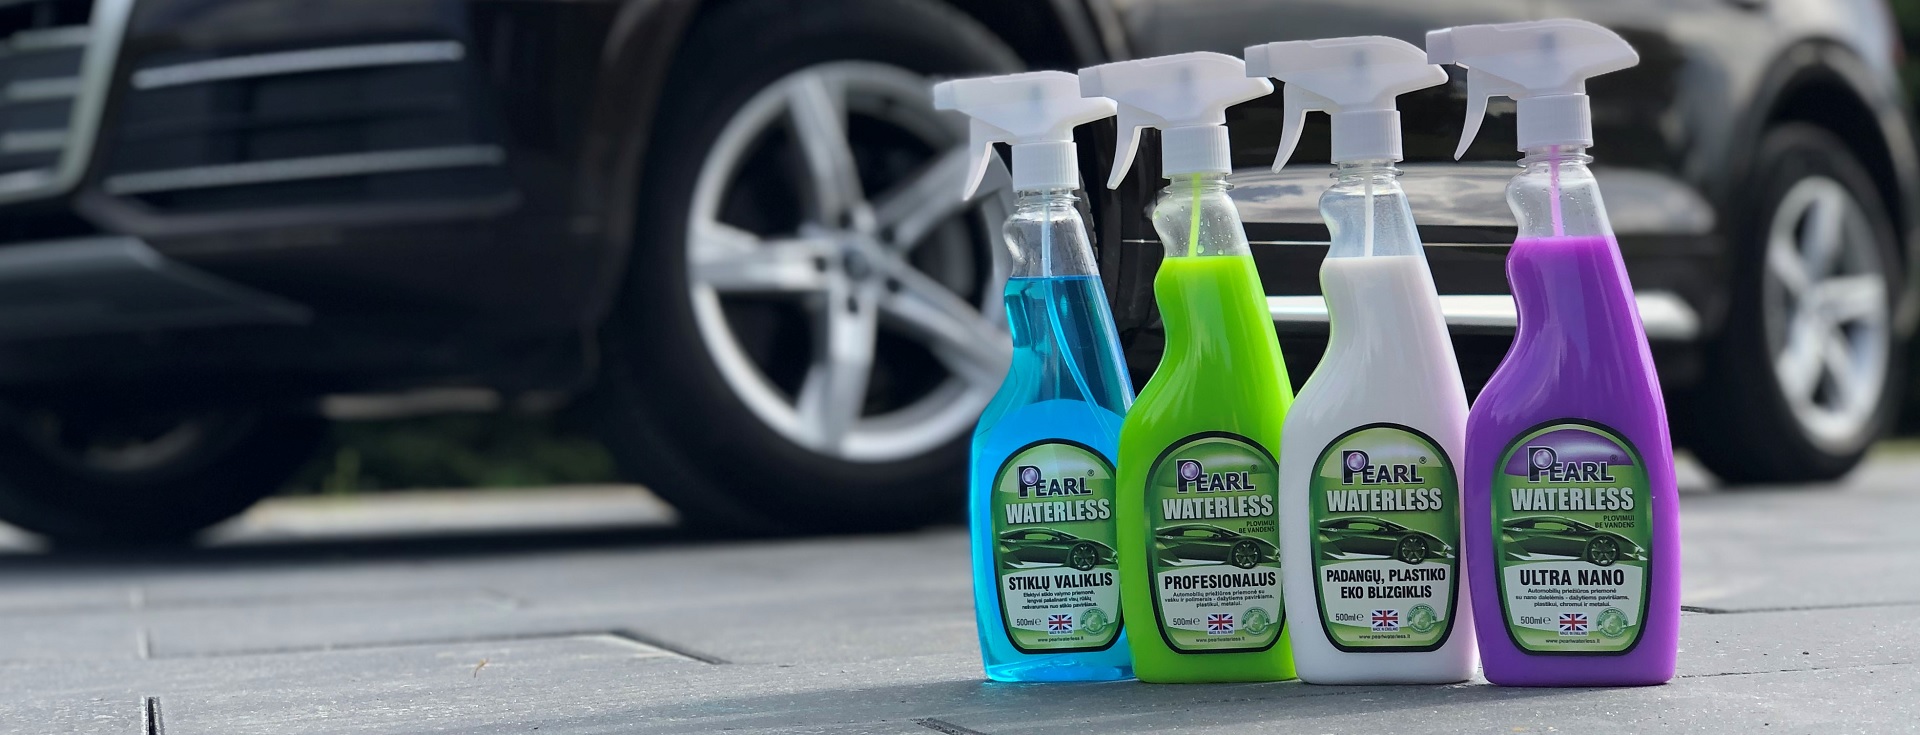 Pearl-Waterless-Car-Wash-Products-Supplied-World-Wide